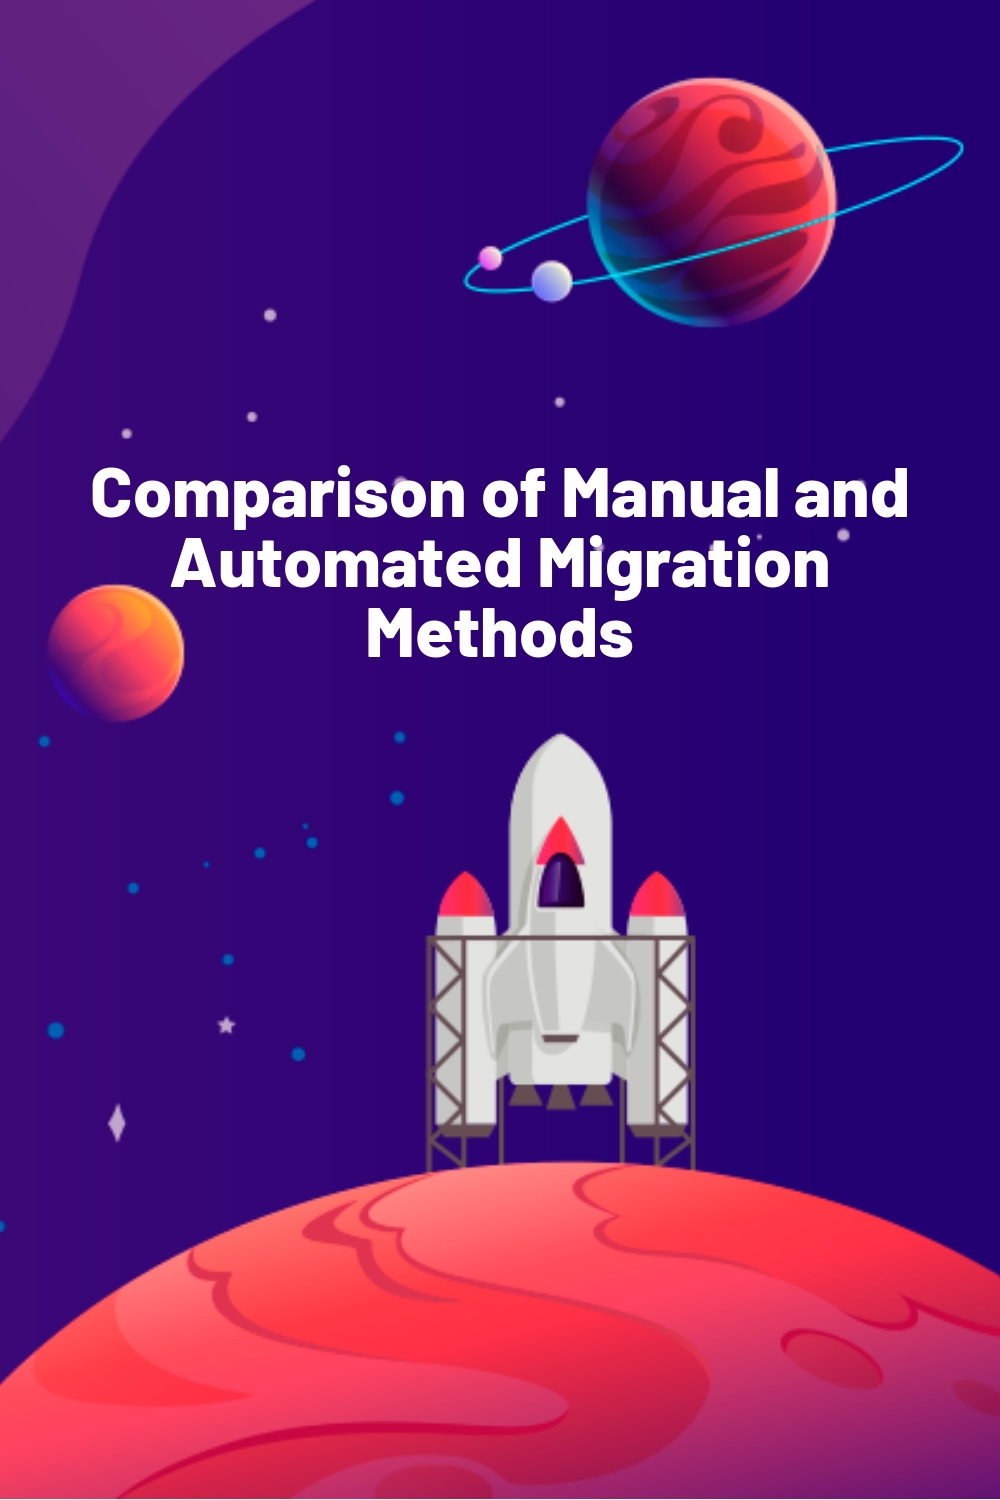 Comparison of Manual and Automated Migration Methods